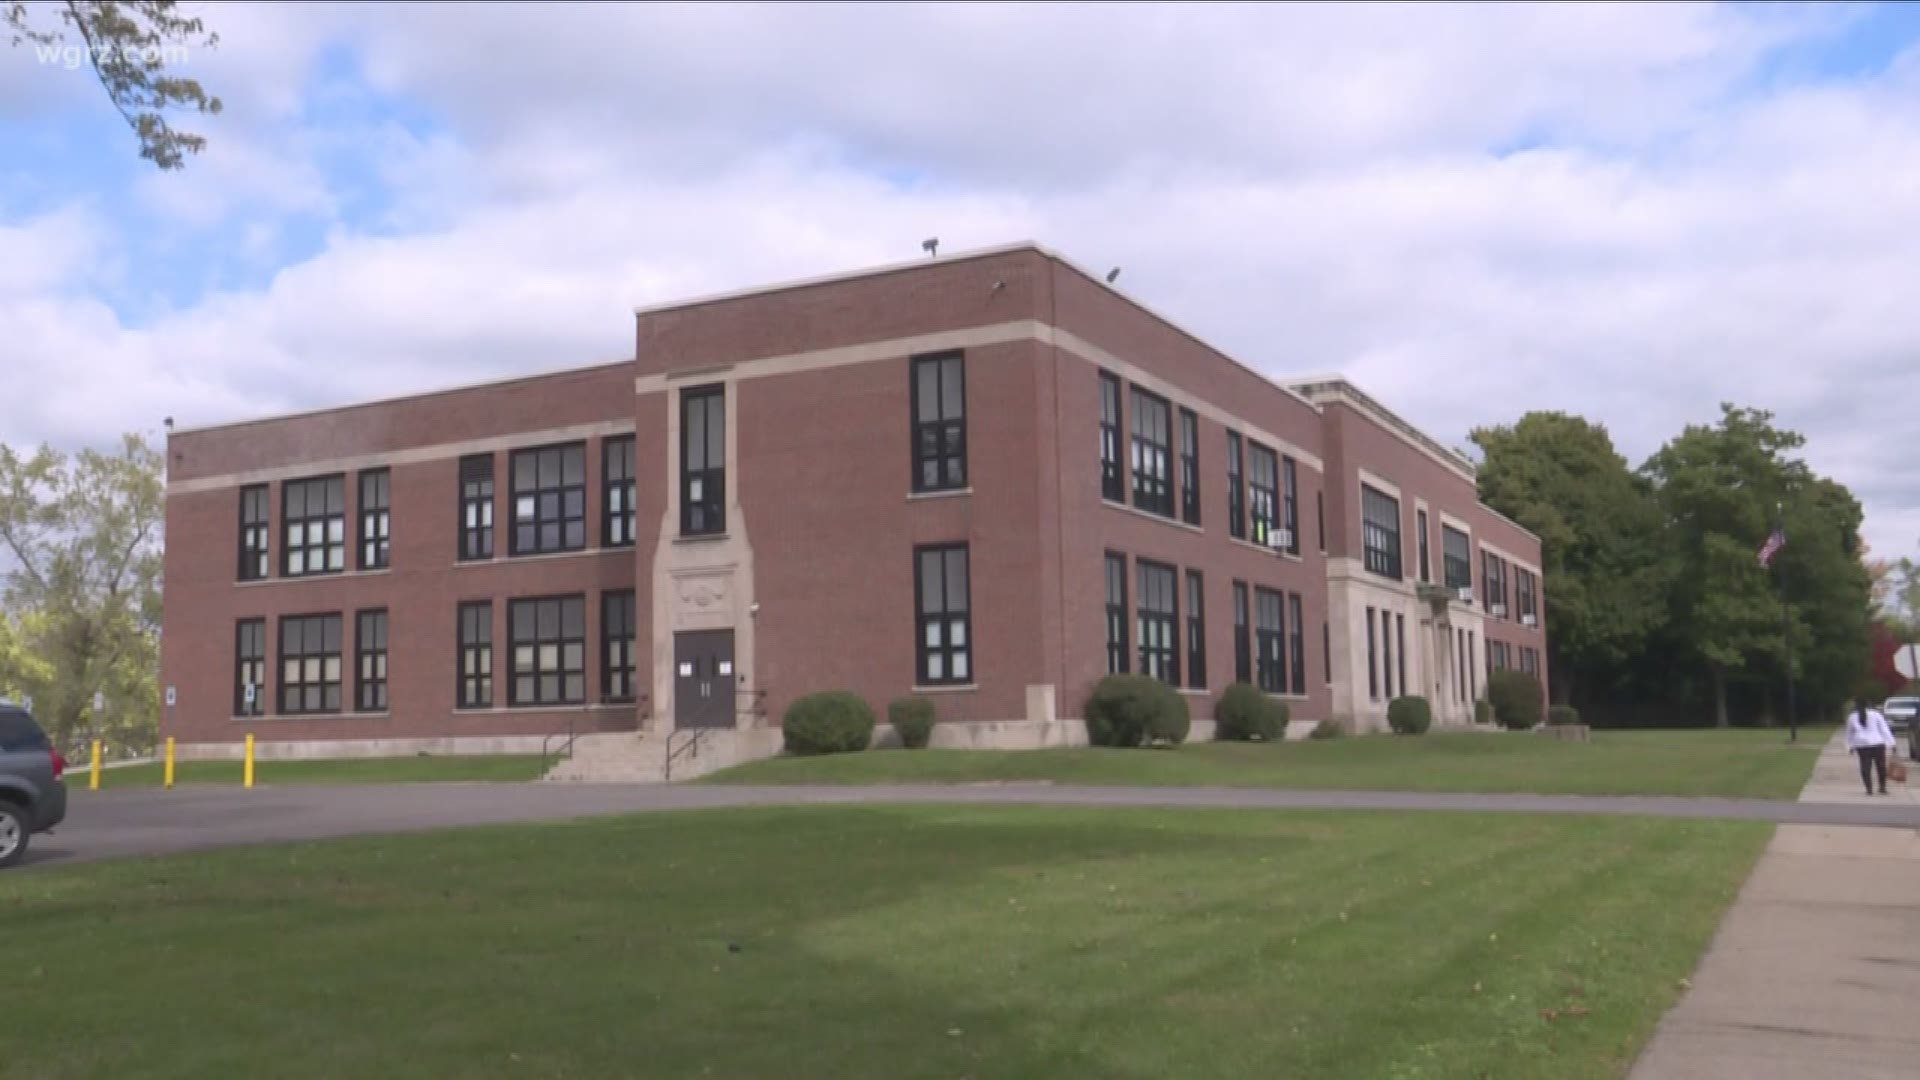 School Expansion May Be On Indian Burial Land